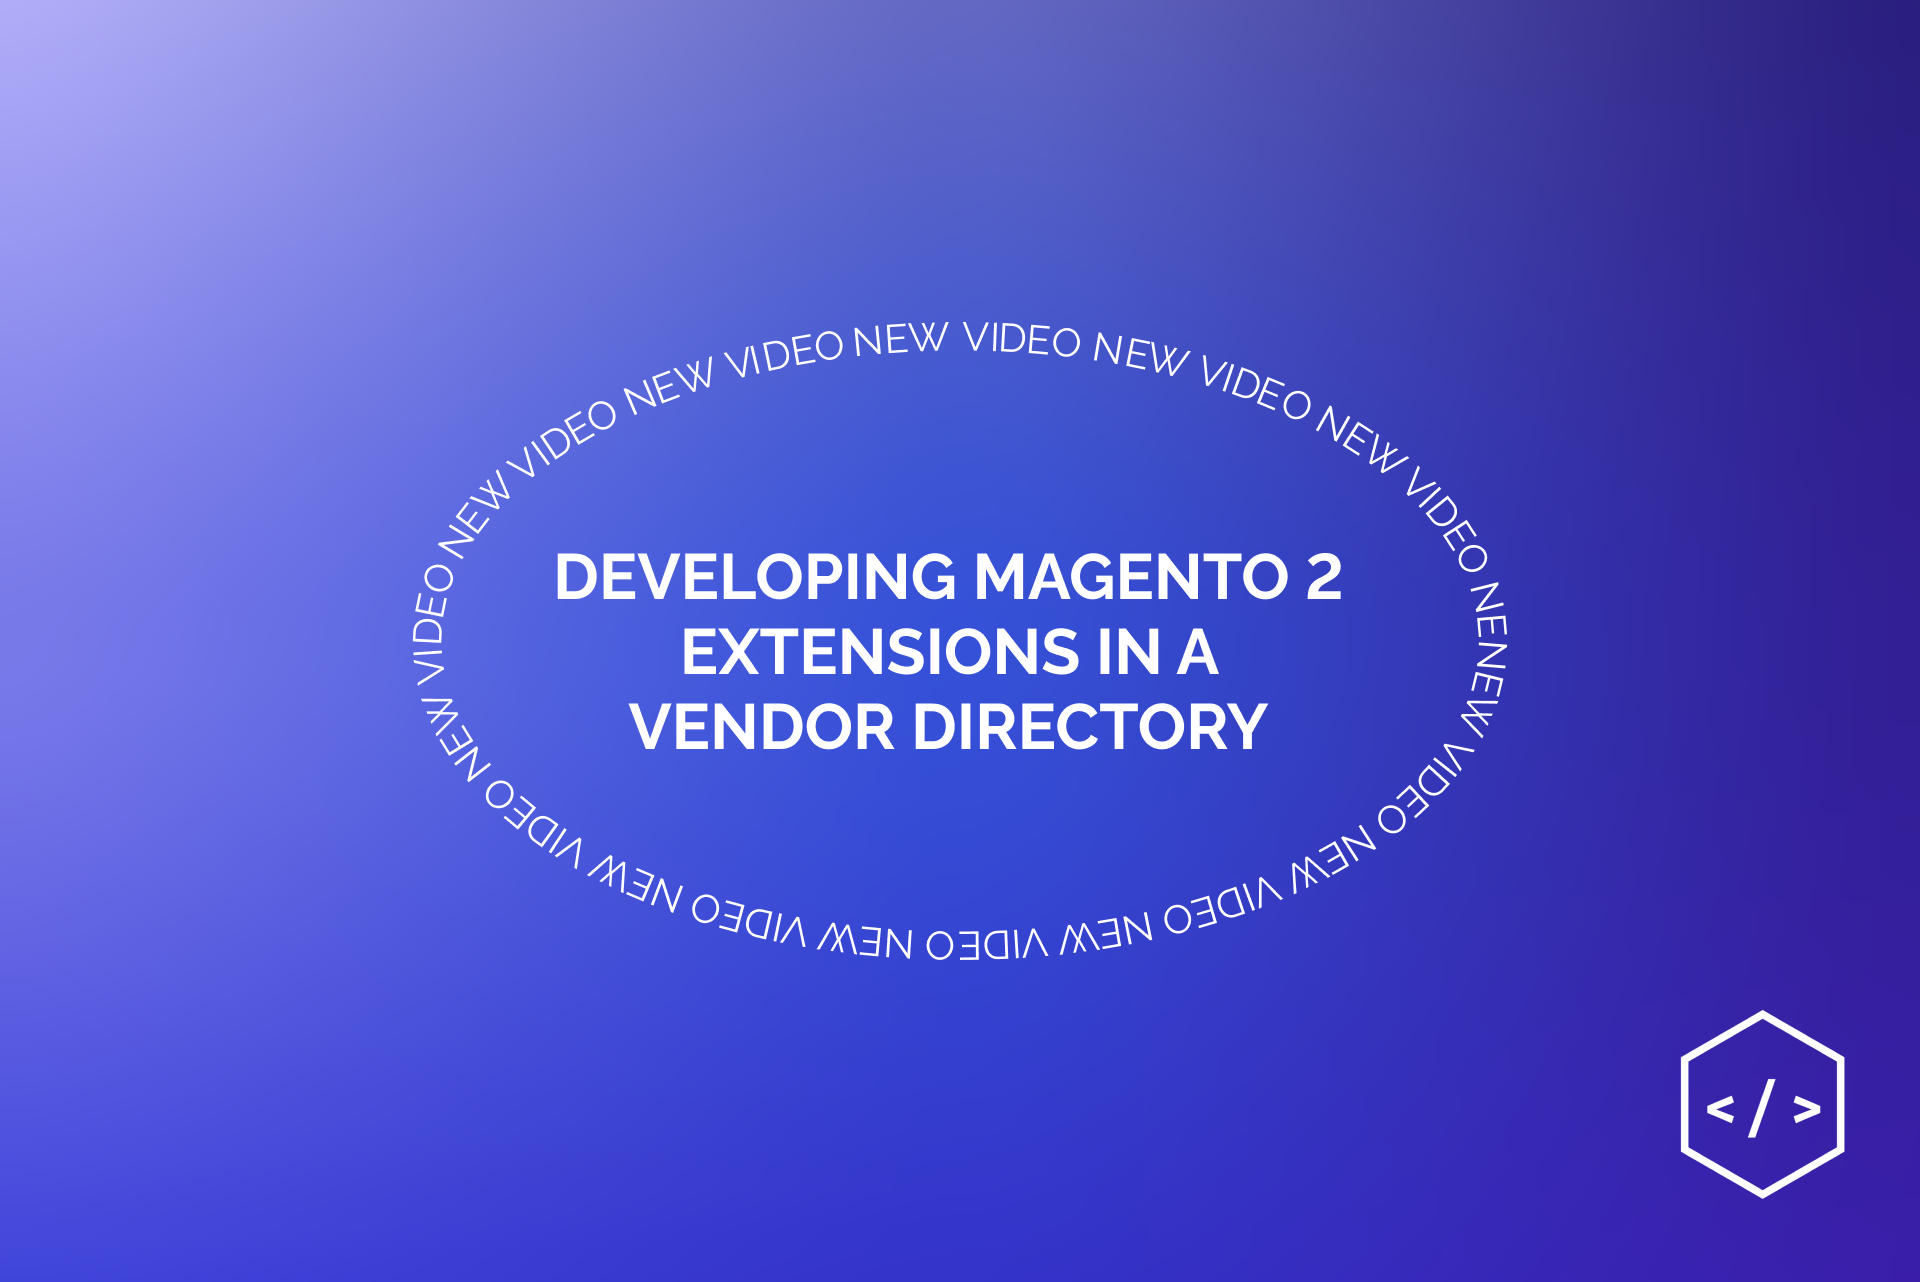 Developing Magento 2 extensions in a vendor directory